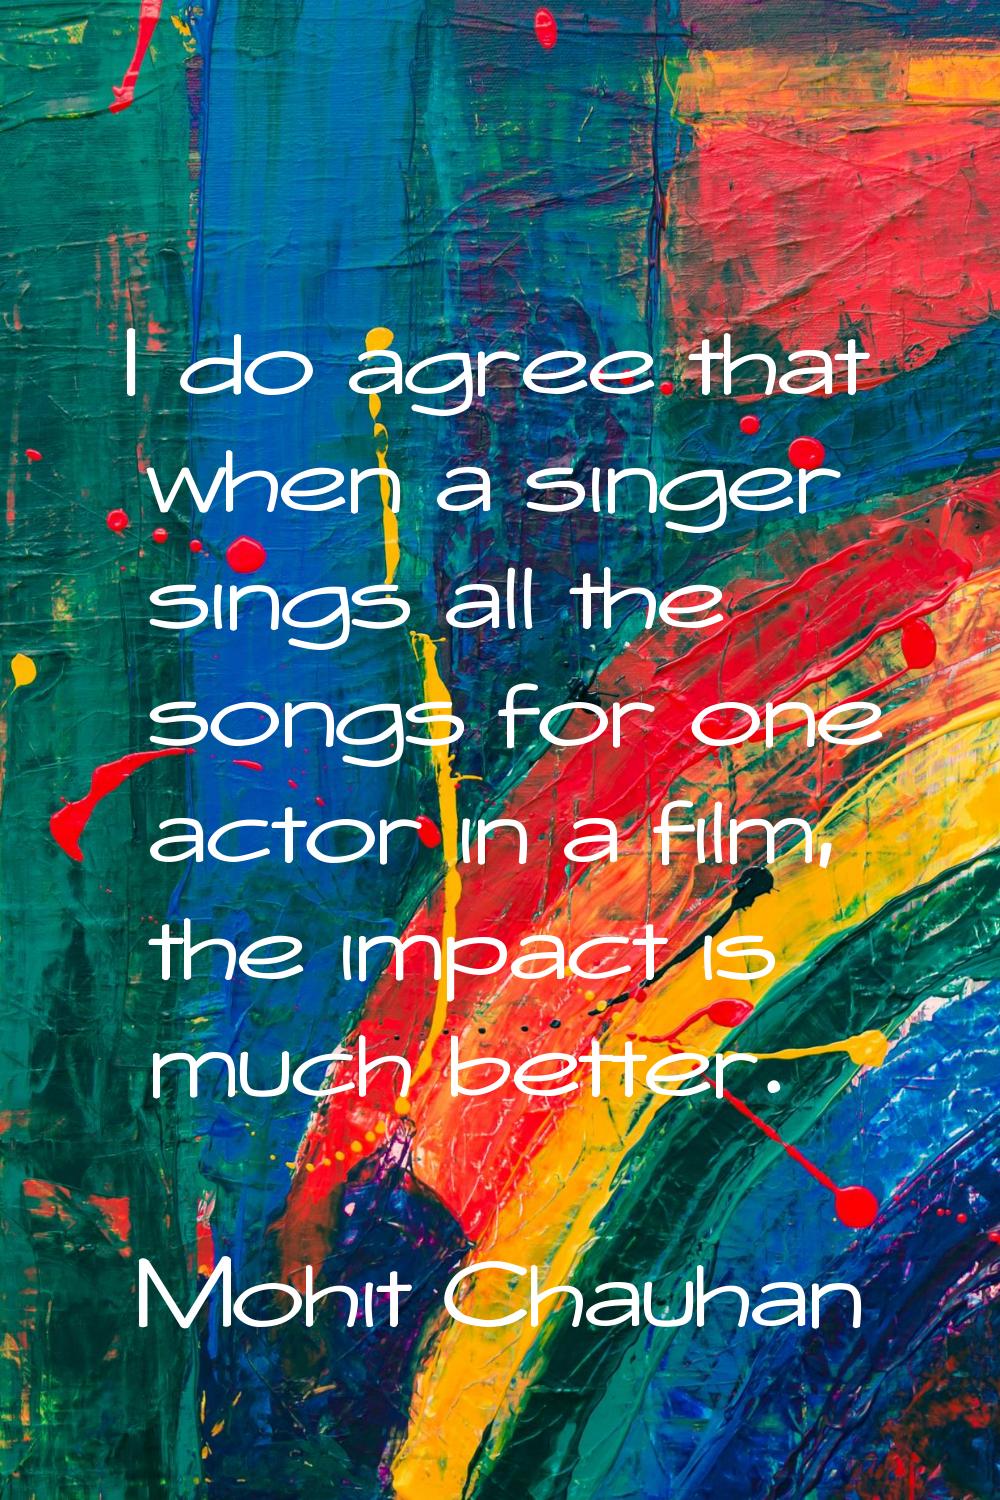 I do agree that when a singer sings all the songs for one actor in a film, the impact is much bette